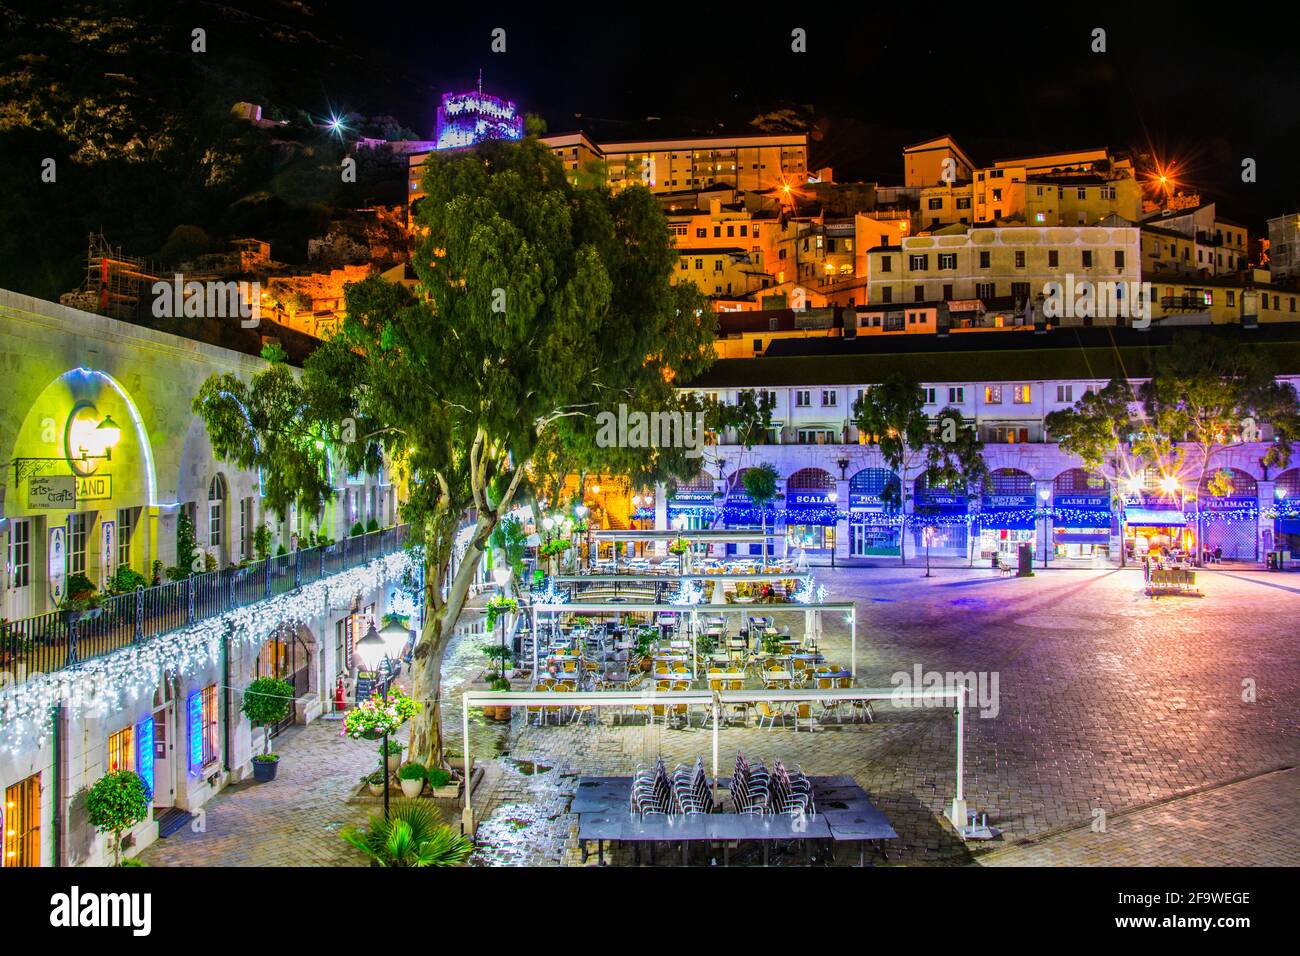 GIBRALTAR, GIBRALTAR, JANUARY 5, 2016: night view of the illuminated grand casemates square and the moorish castle in gibraltar. Stock Photo